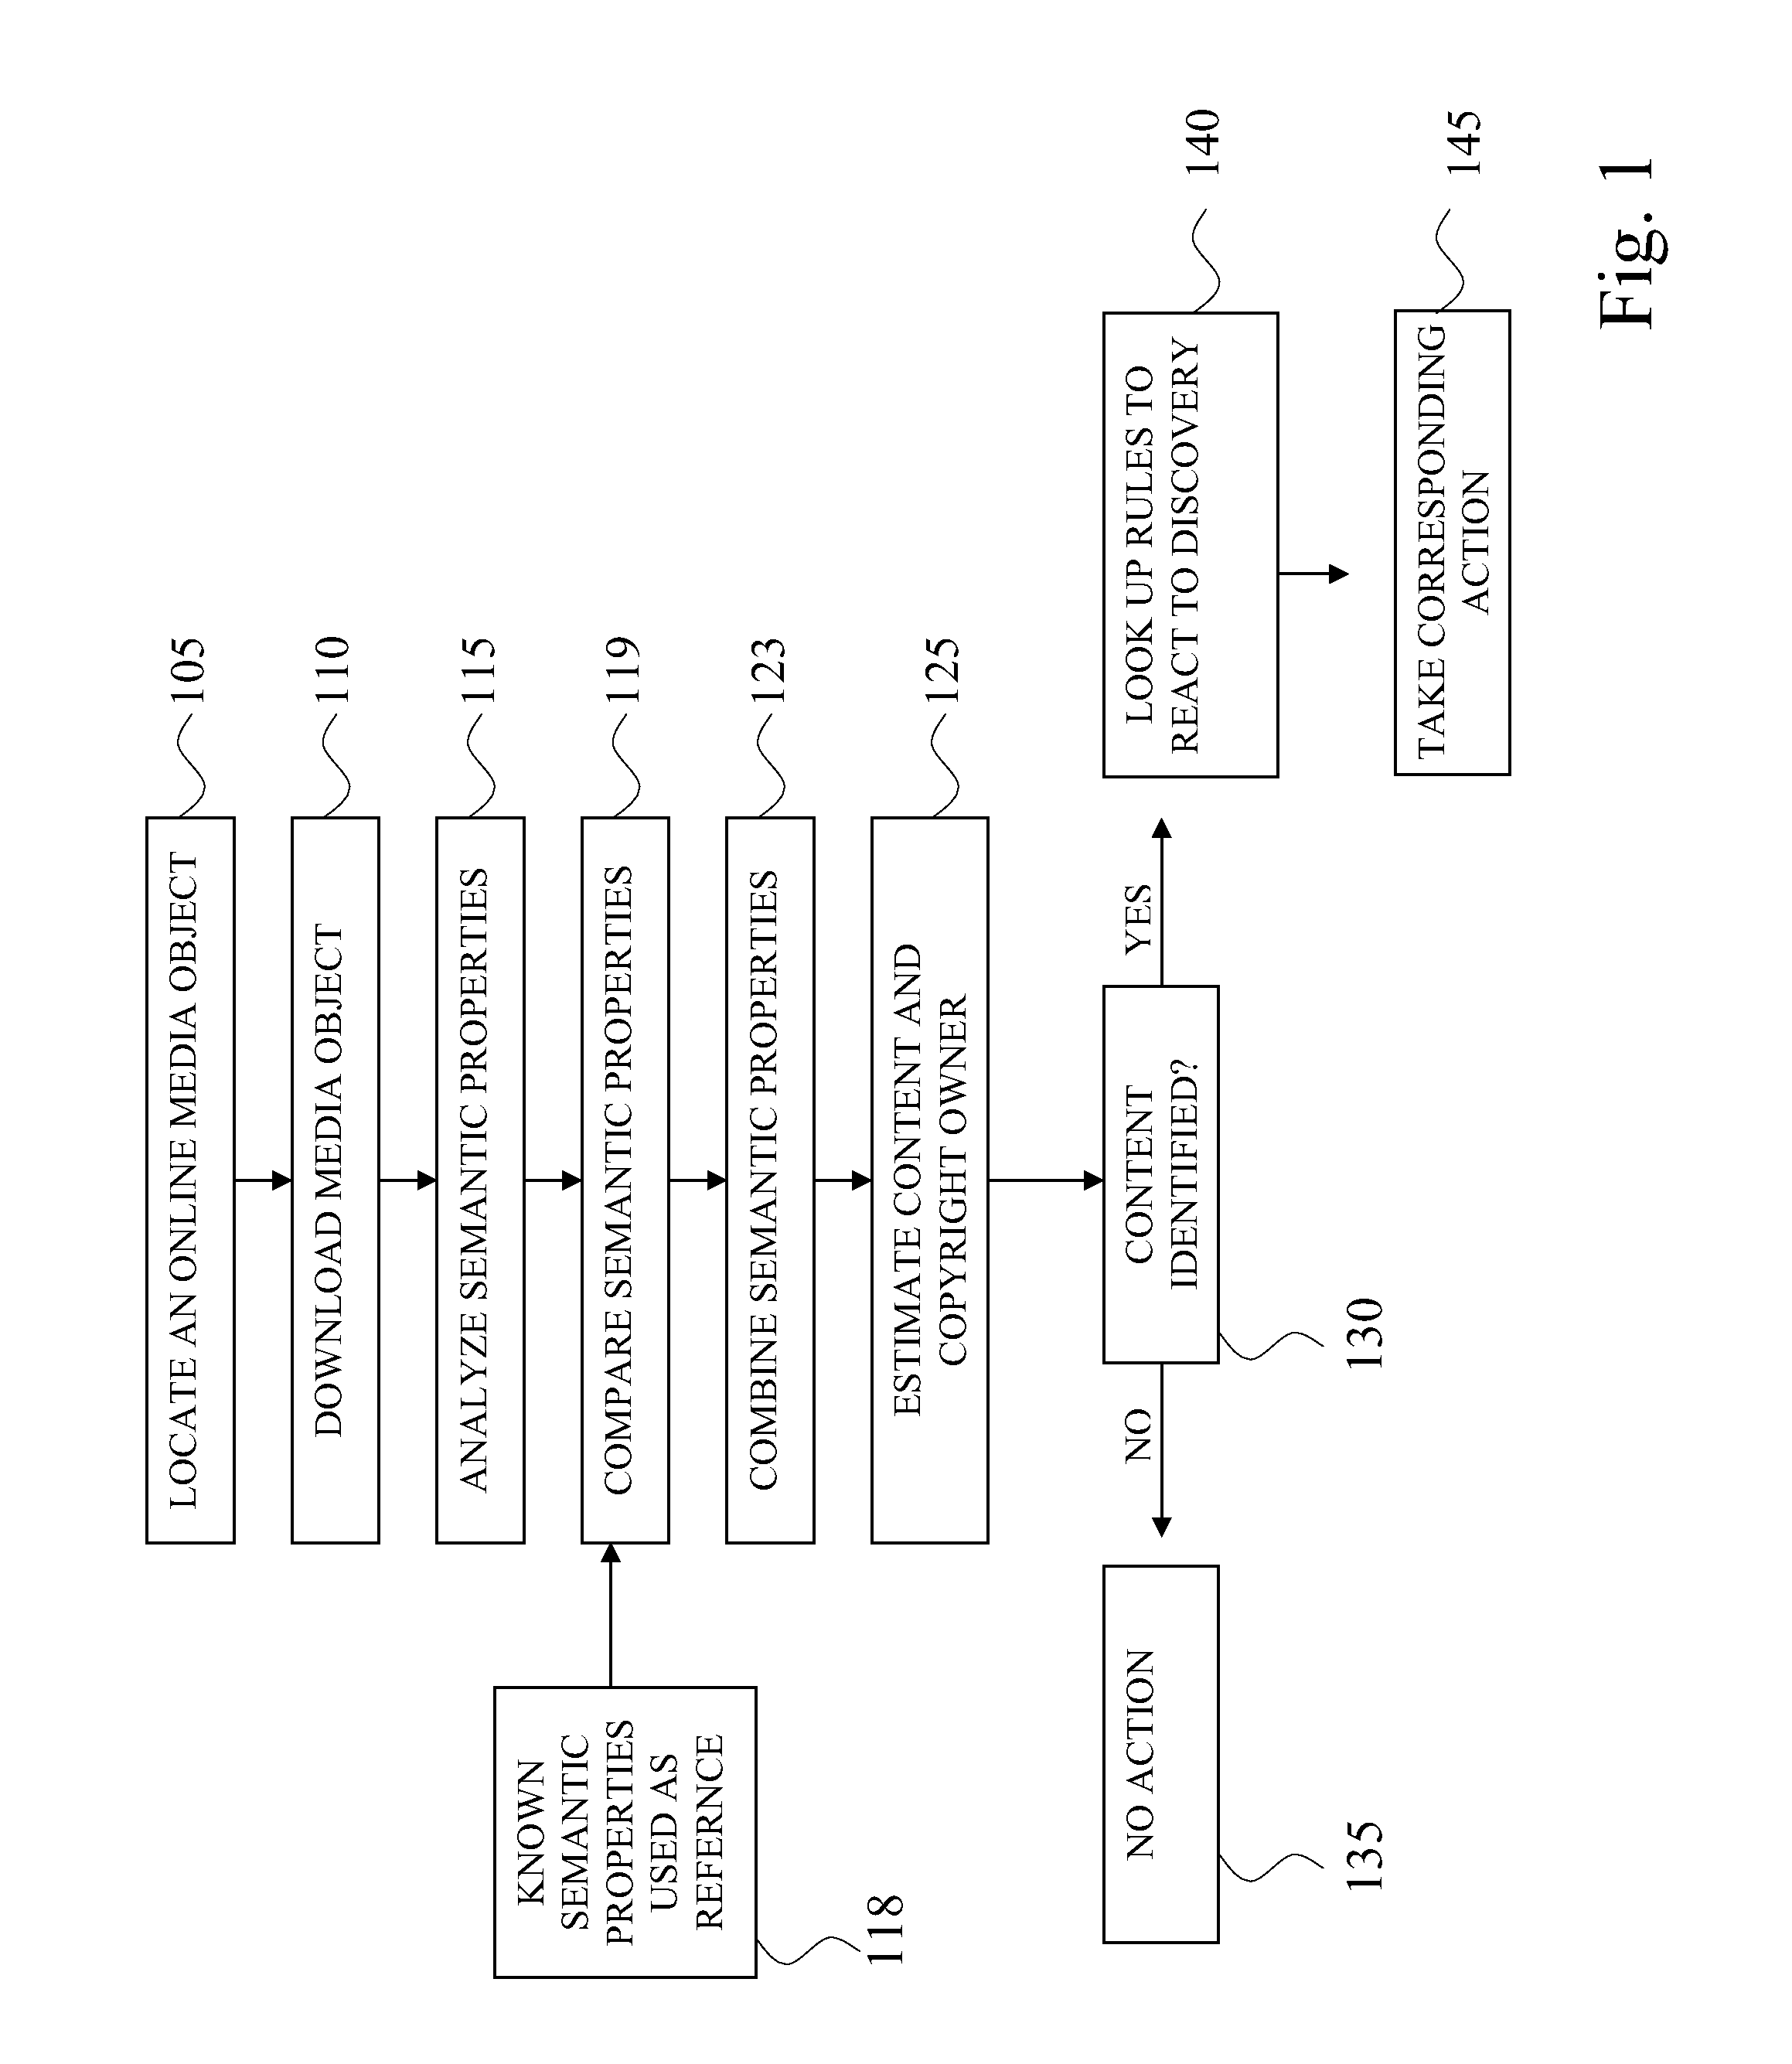 Systems and methods for performing semantic analysis of media objects